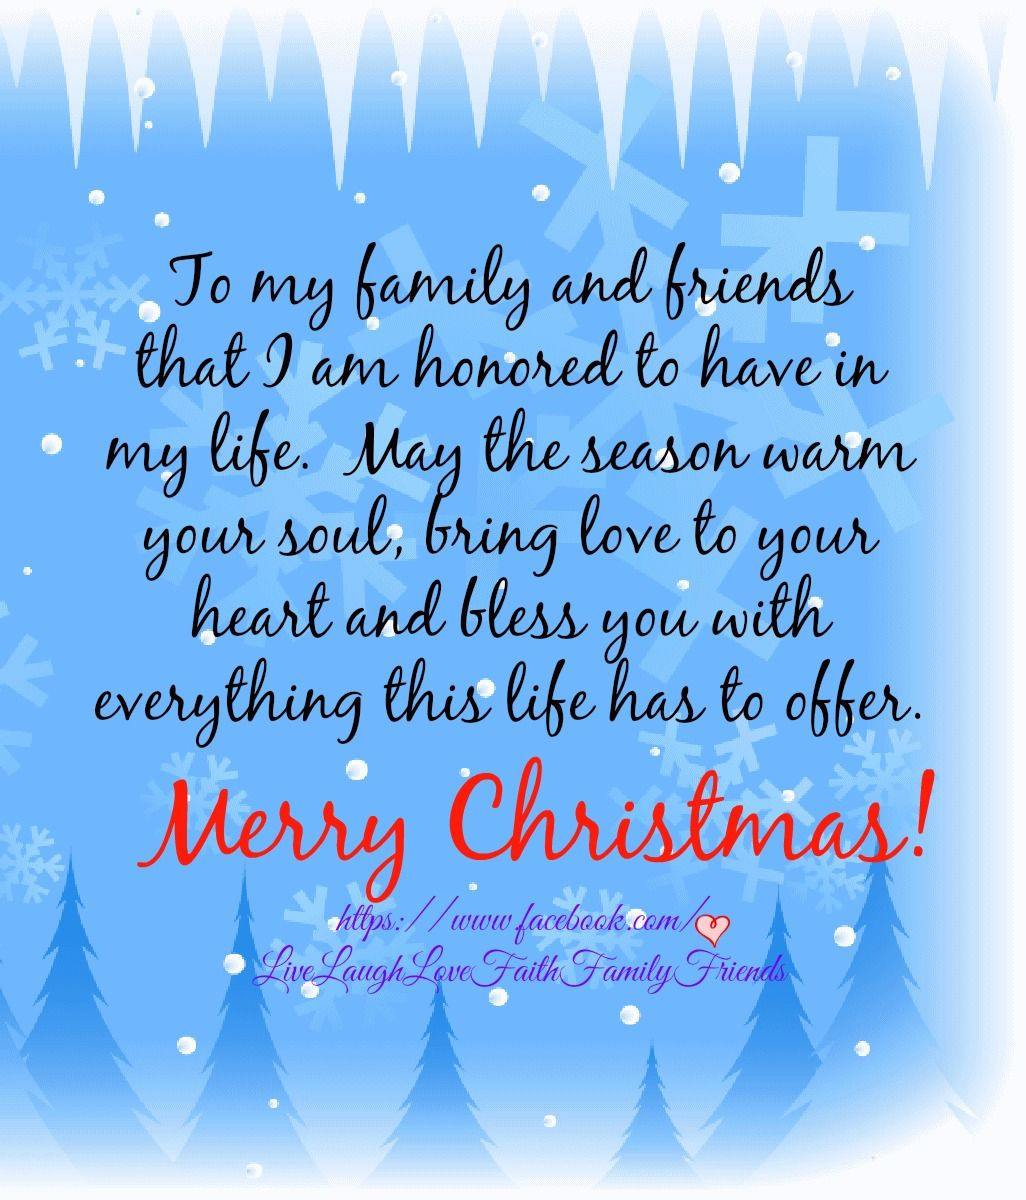 Merry Christmas Everyone Quote
 Merry Christmas XOXO perfect for this weekend Lucky to